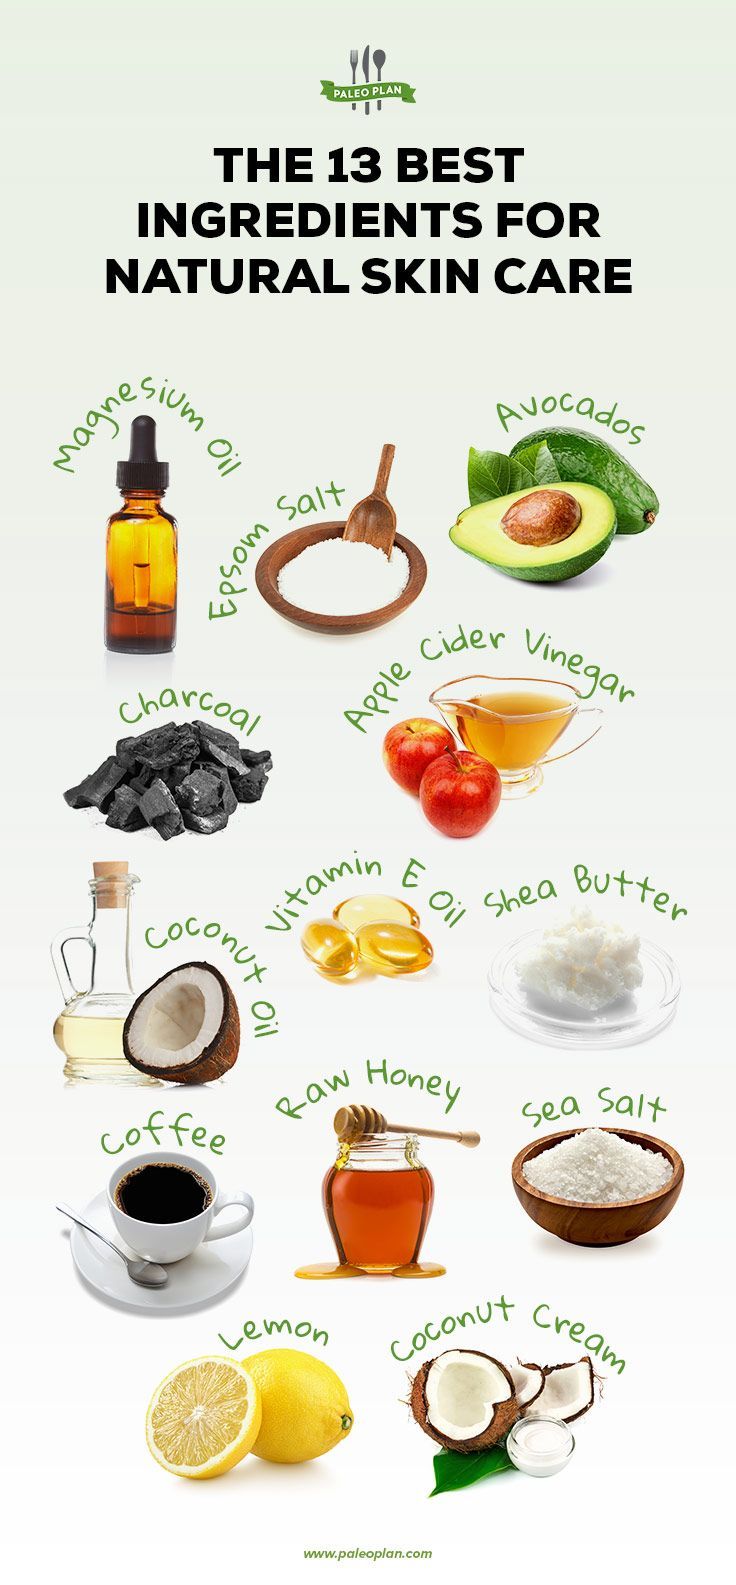 The 13 Best Ingredients for Natural Skin Care -   13 skin care Remedies tips
 ideas